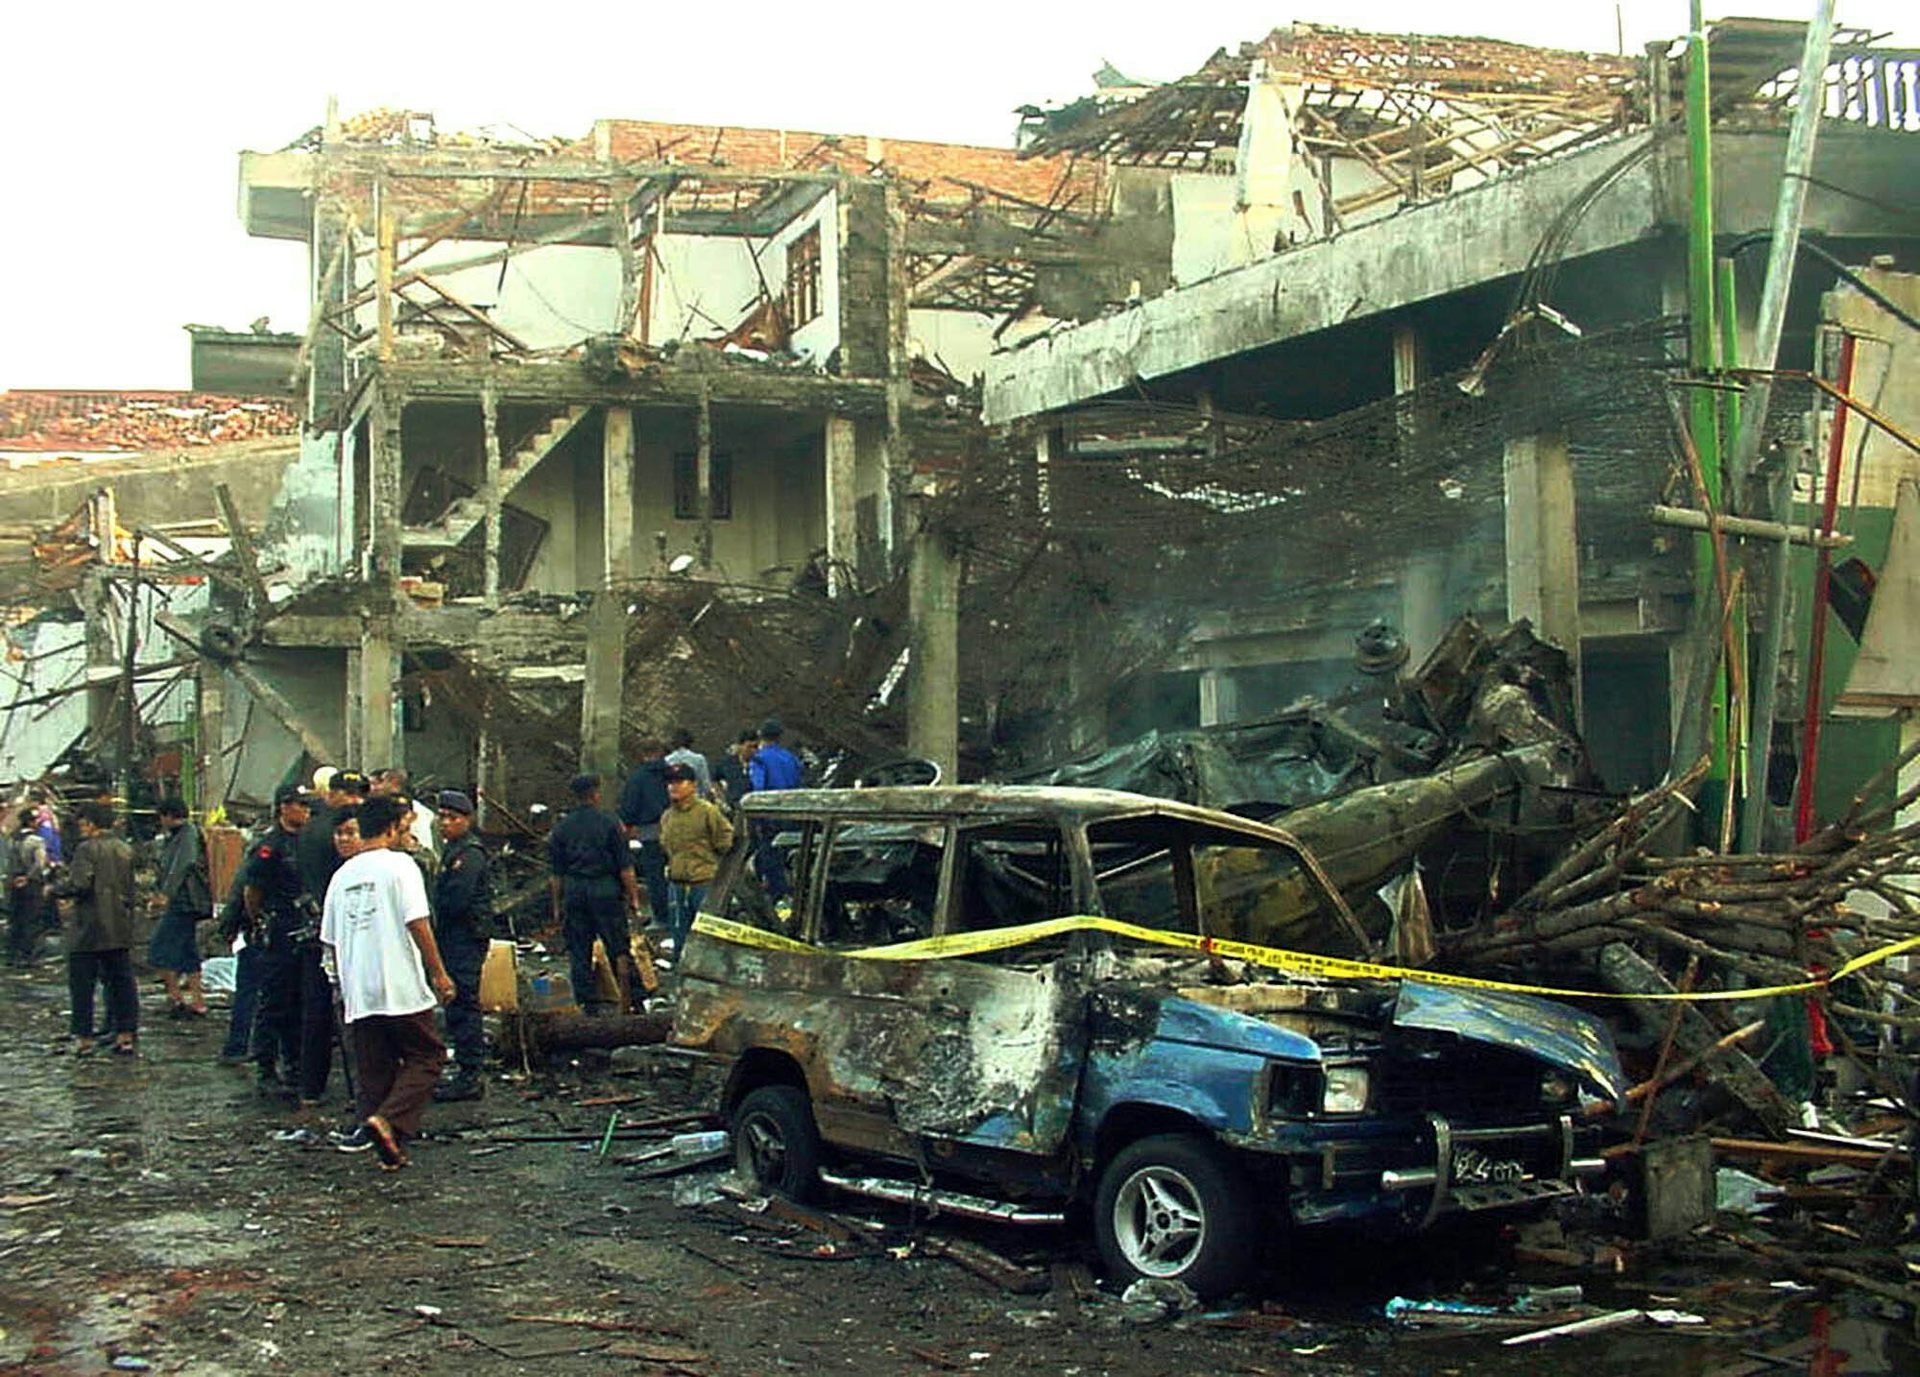 The wreckage of a nightclub in the wake of the 2002 Bali bombings